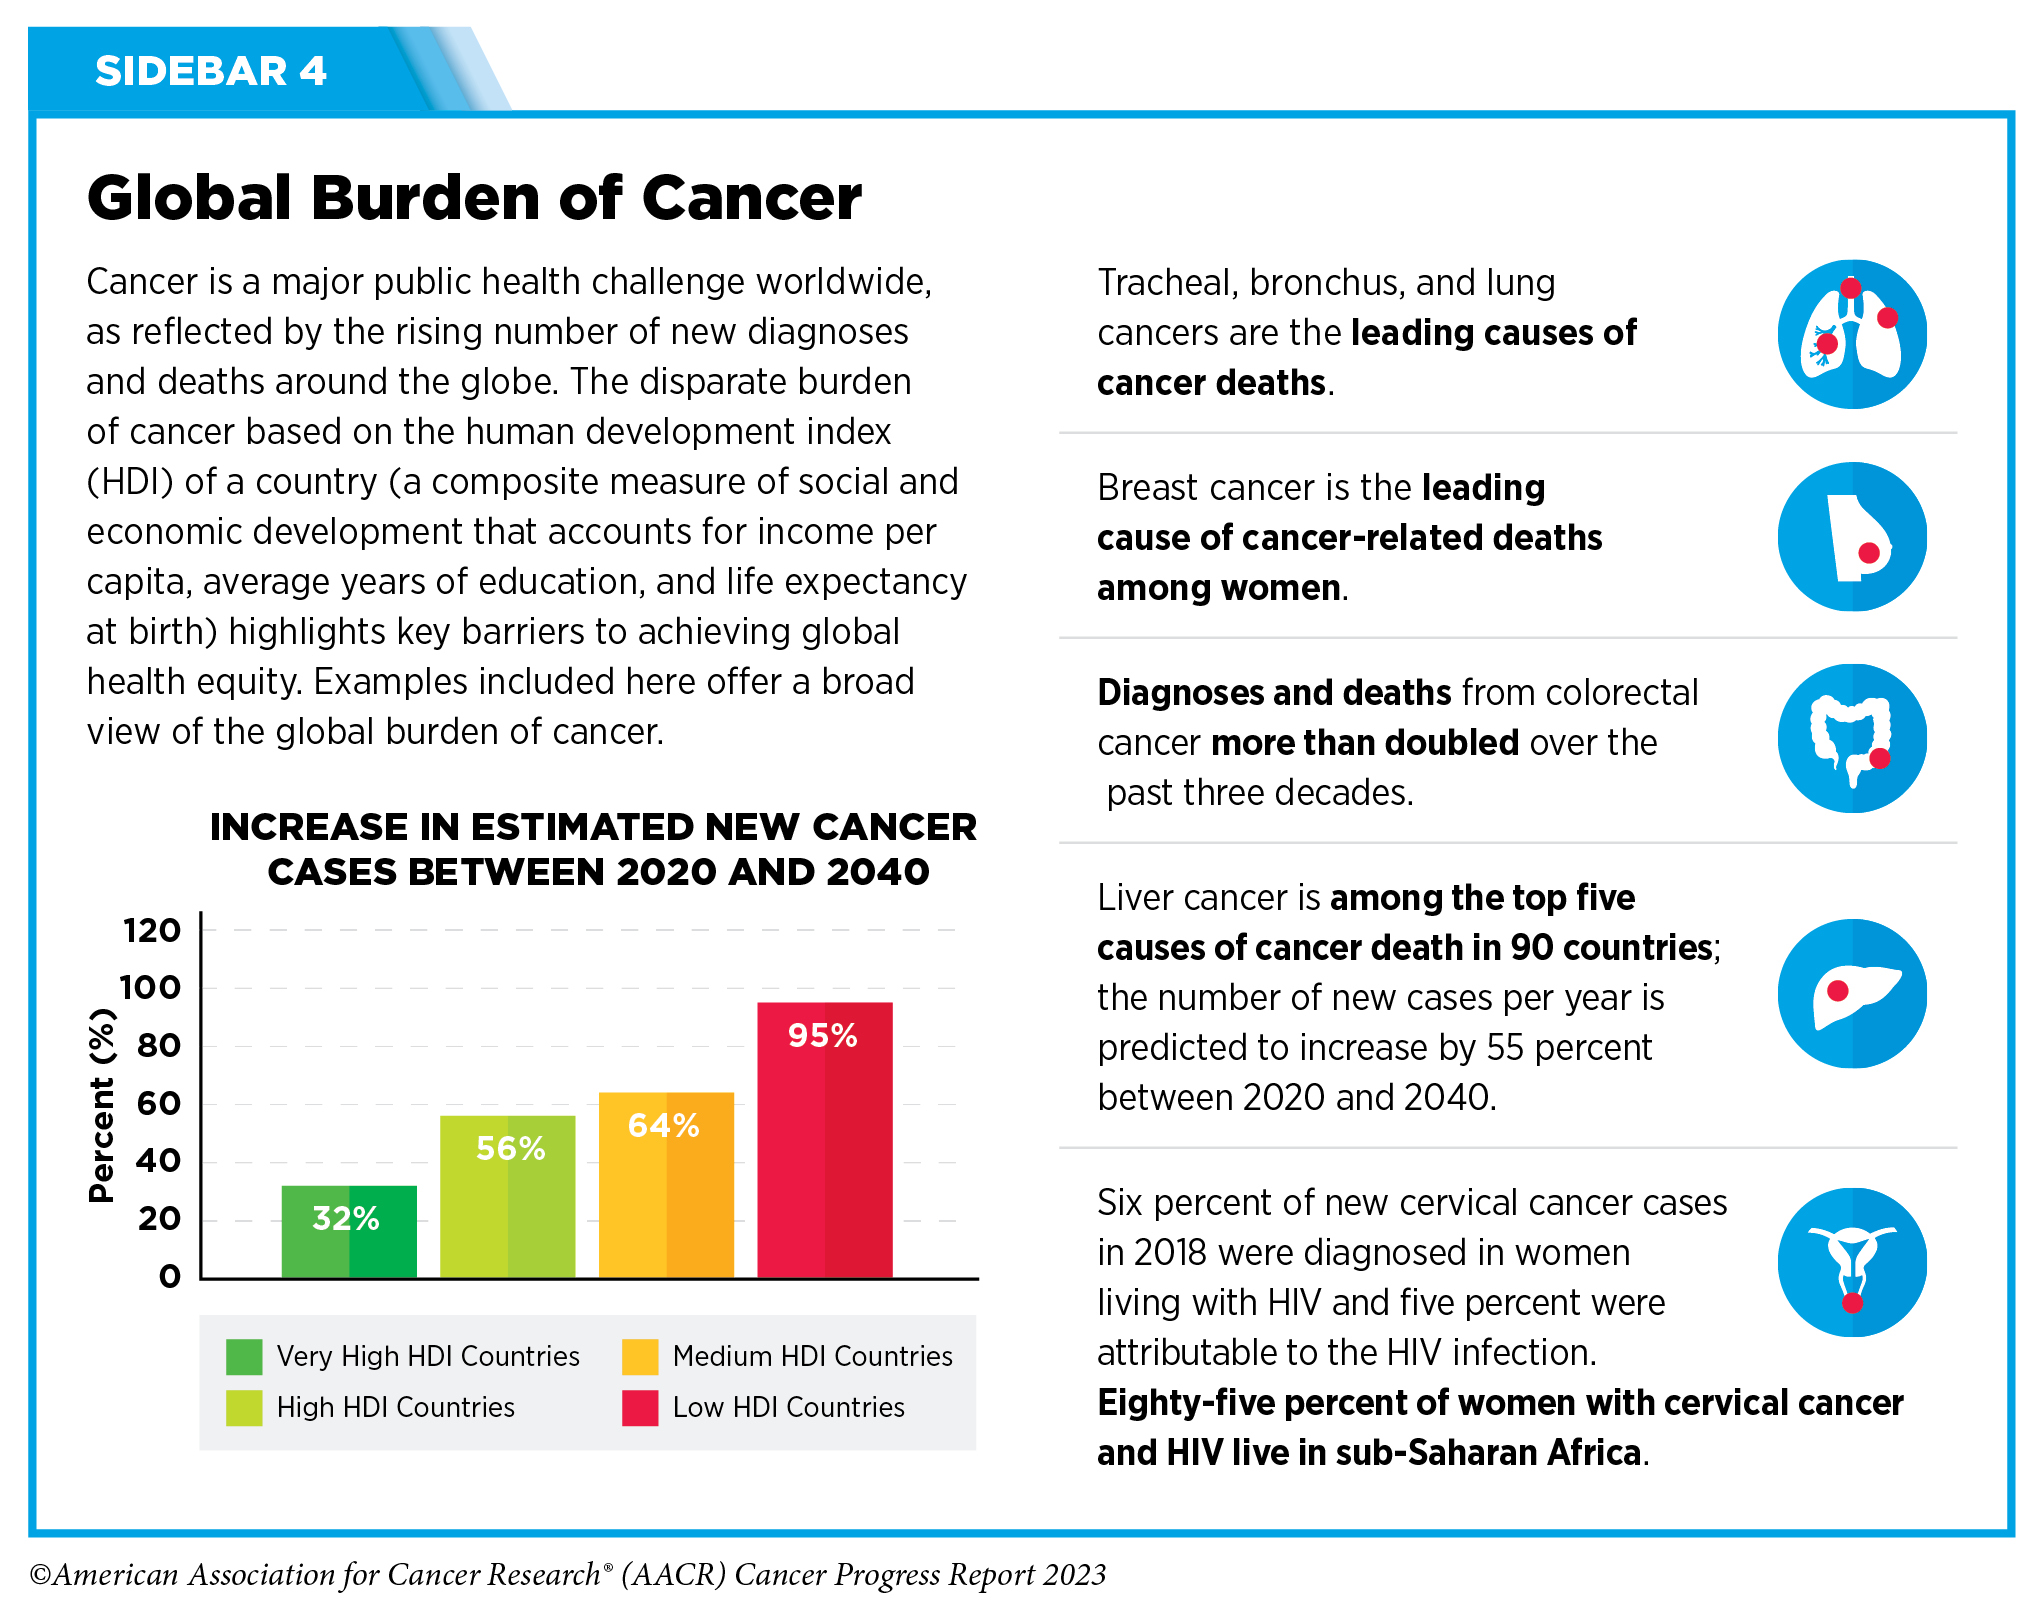 Cancer in 2023  AACR Cancer Progress Report 2023